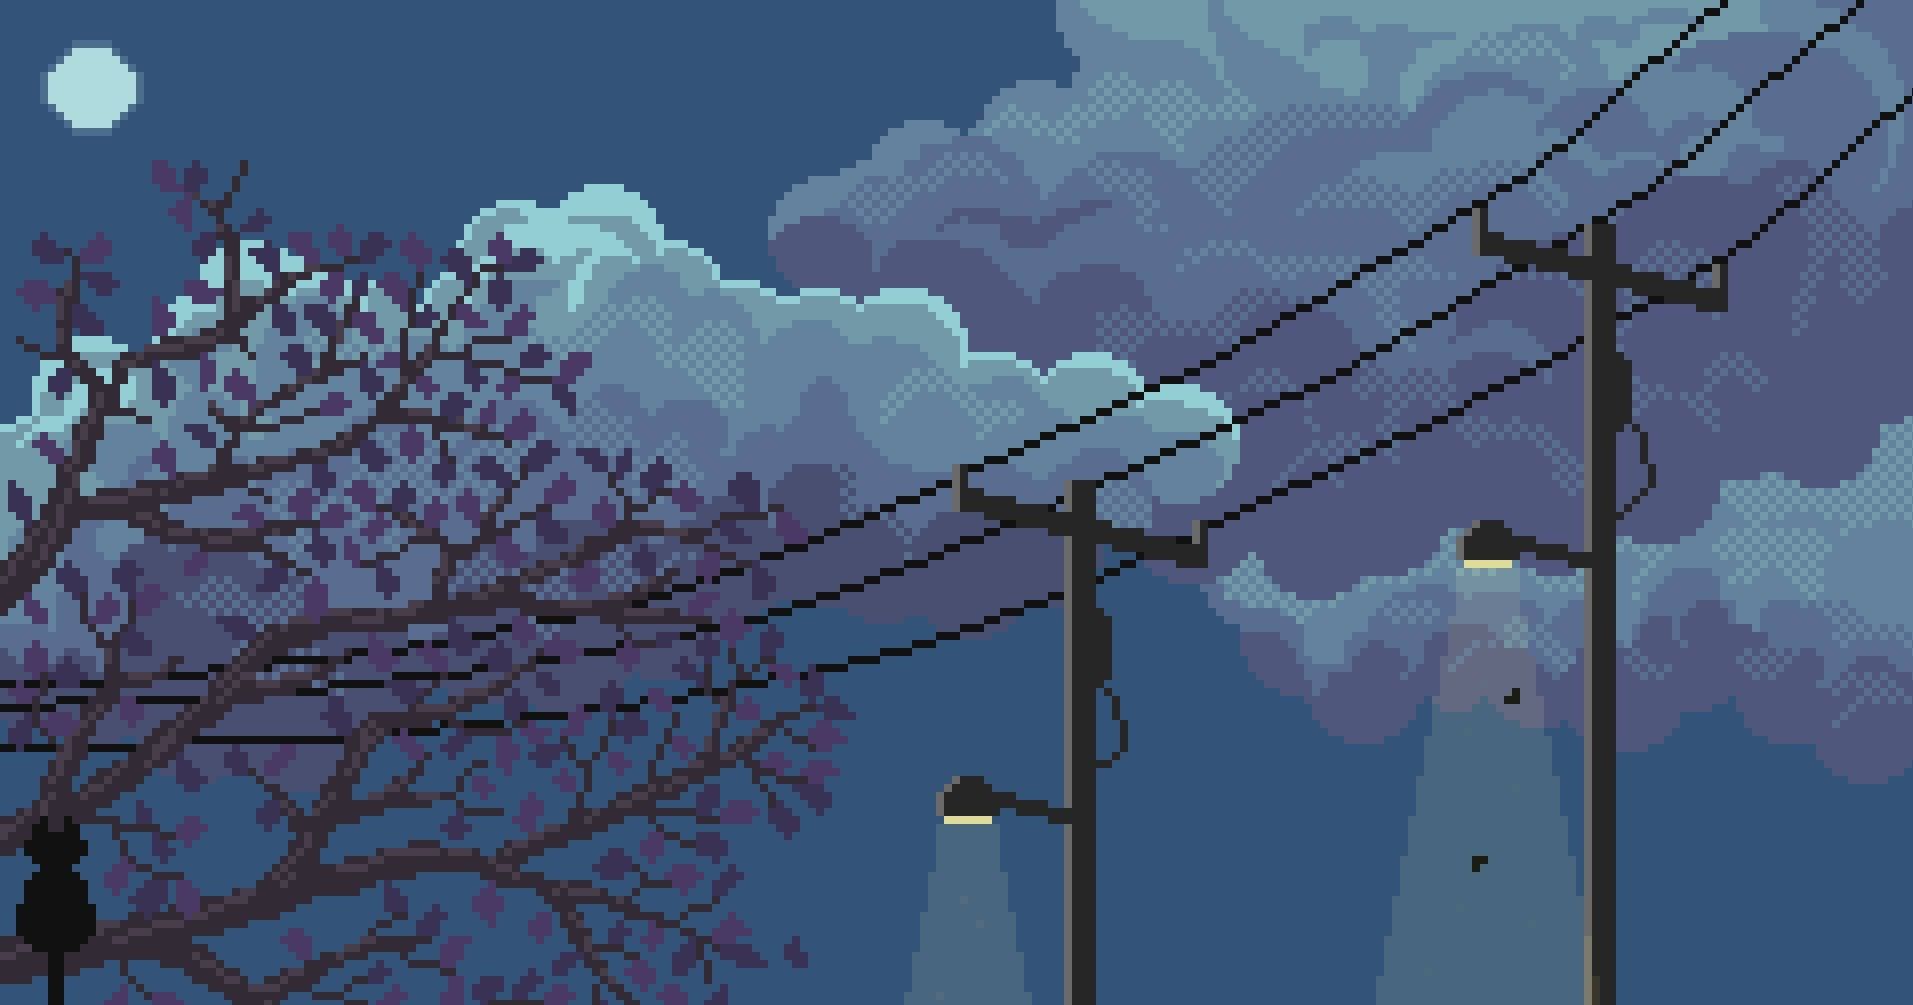 A night scene with power lines and a street light - HD, pixel art, sky